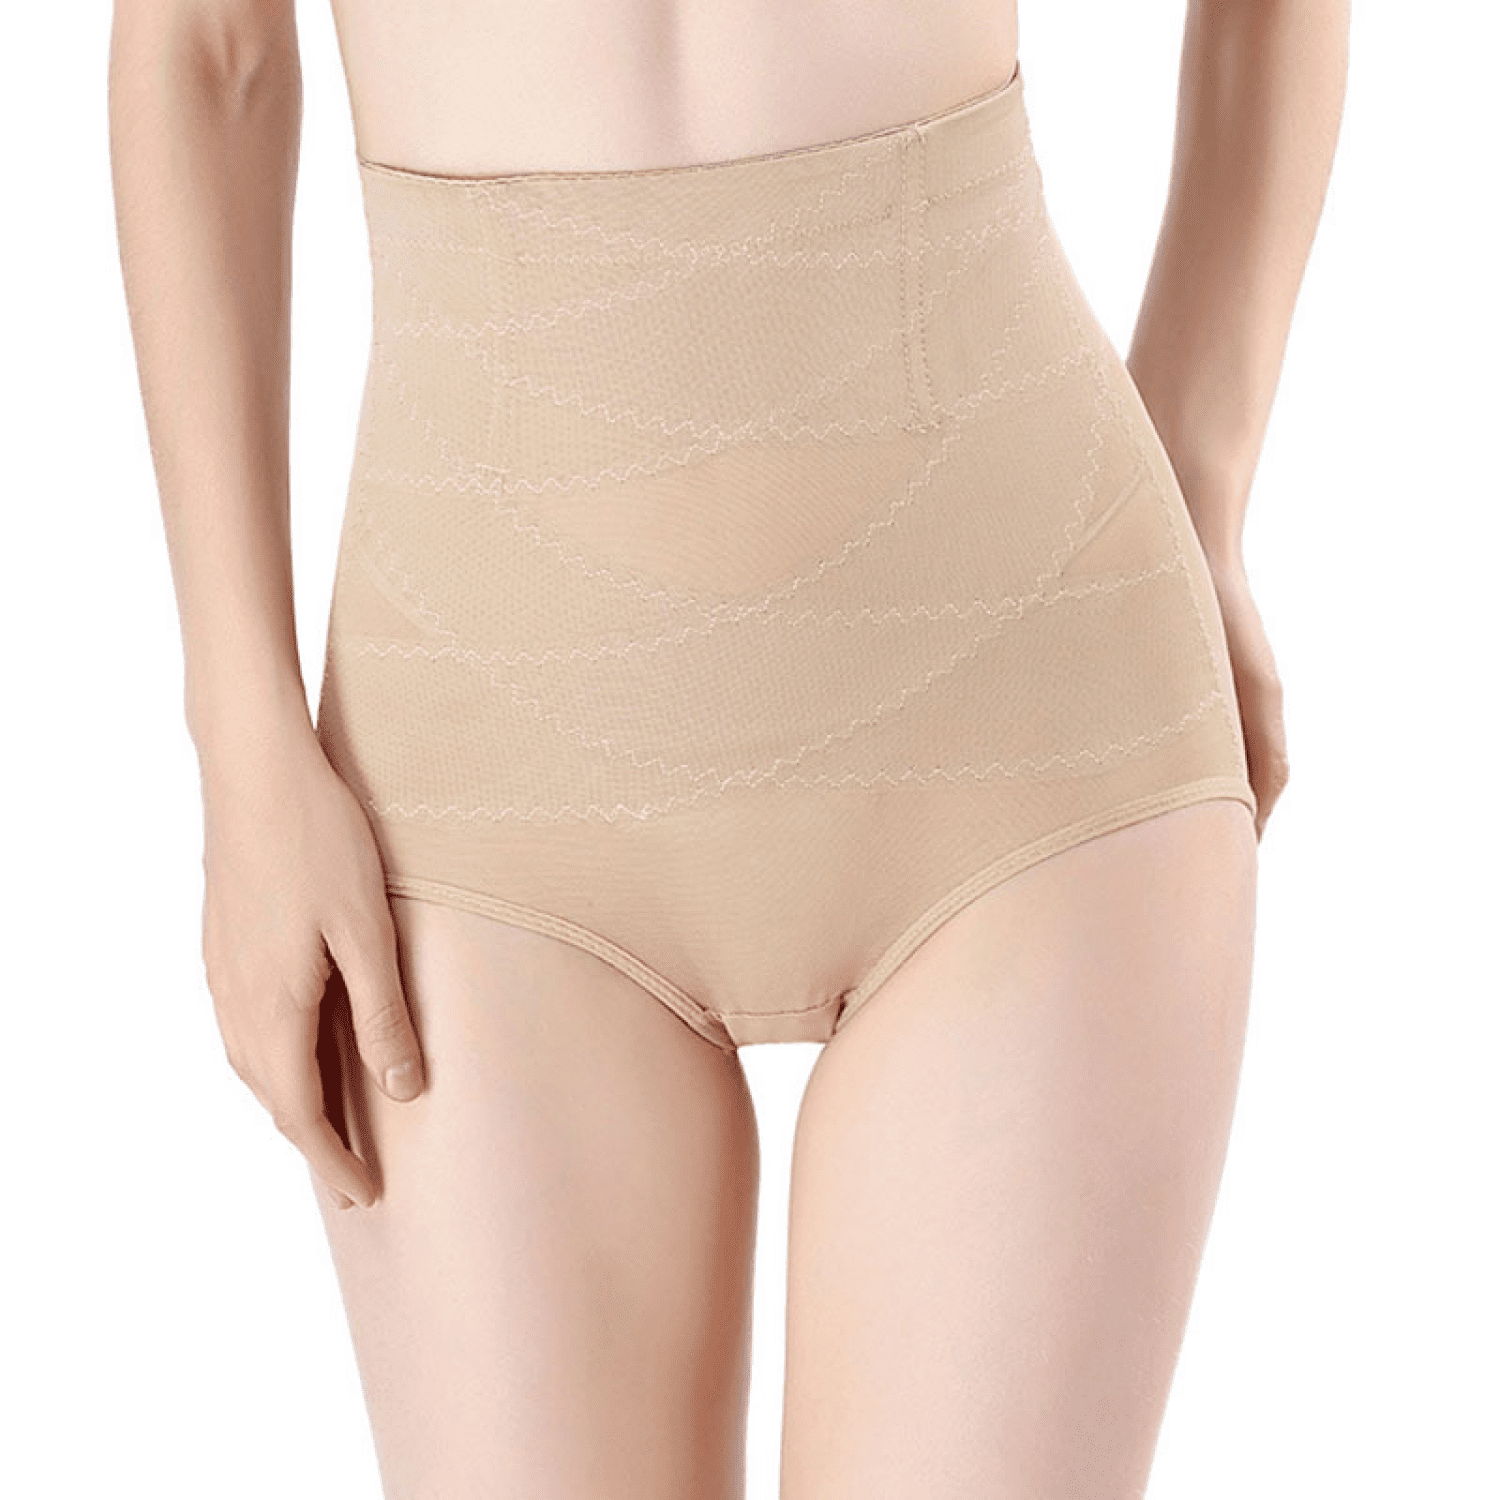 FITVALEN Women's Comfort Anti-Cellulite Shapewear High Waist Compression  Tummy Control Thigh Slimmer Shaper Panties Butt Lifter Shorts 